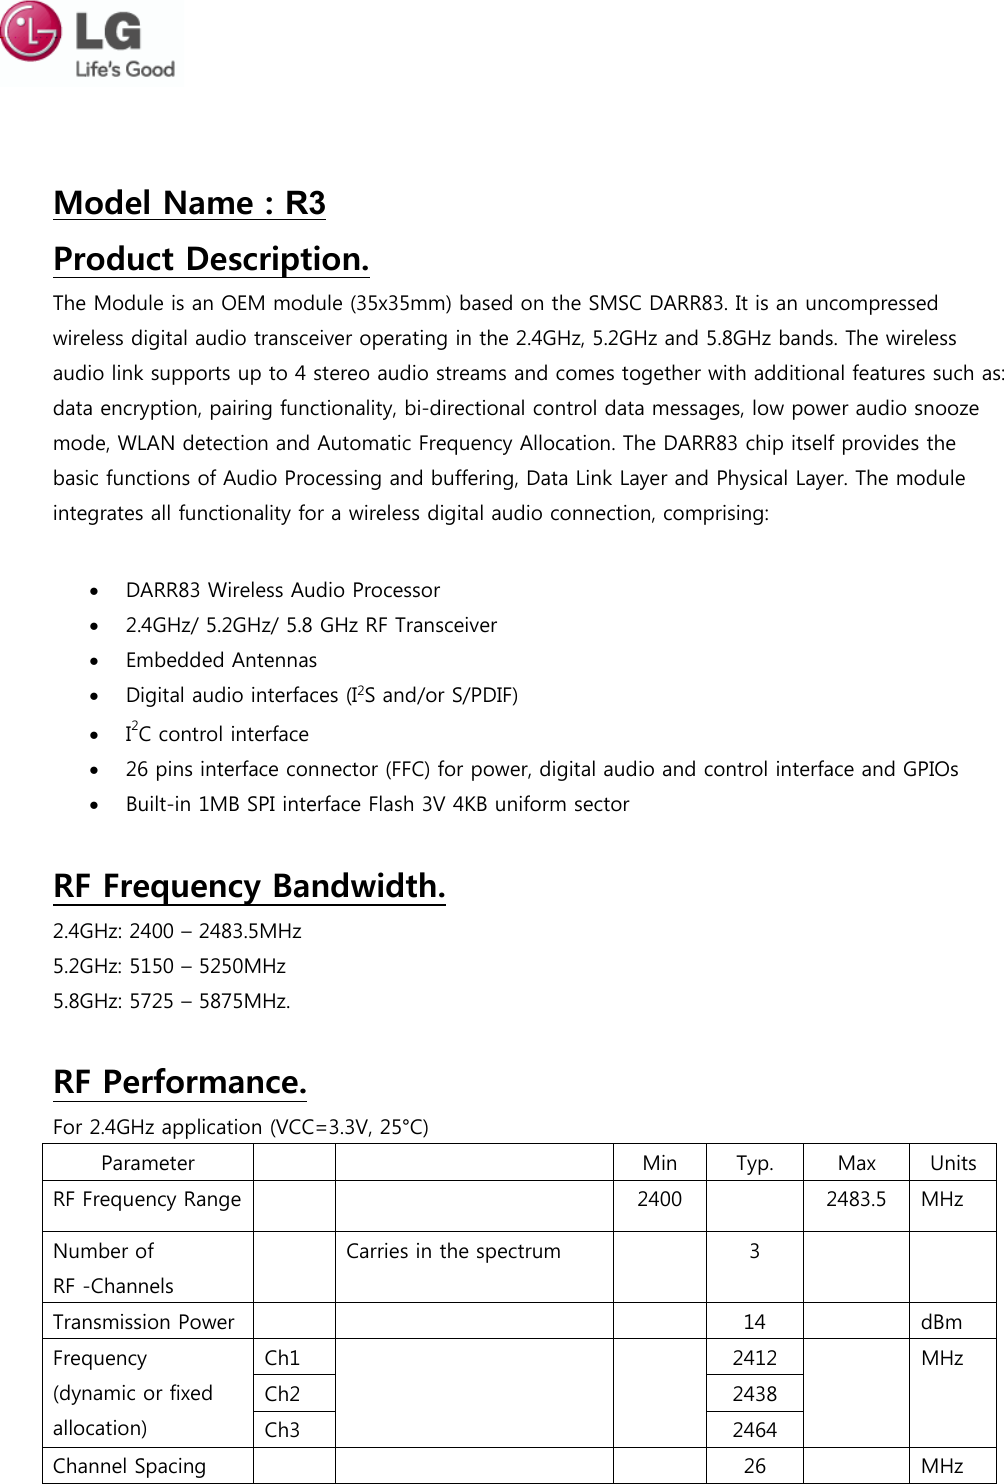 Model Name : R3 Product Description. The Module is an OEM module (35x35mm) based on the SMSC DARR83. It is an uncompressed wireless digital audio transceiver operating in the 2.4GHz, 5.2GHz and 5.8GHz bands. The wireless audio link supports up to 4 stereo audio streams and comes together with additional features such as: data encryption, pairing functionality, bi-directional control data messages, low power audio snooze mode, WLAN detection and Automatic Frequency Allocation. The DARR83 chip itself provides the basic functions of Audio Processing and buffering, Data Link Layer and Physical Layer. The module integrates all functionality for a wireless digital audio connection, comprising:  DARR83 Wireless Audio Processor2.4GHz/ 5.2GHz/ 5.8 GHz RF TransceiverEmbedded AntennasDigital audio interfaces (I2S and/or S/PDIF)I2C control interface26 pins interface connector (FFC) for power, digital audio and control interface and GPIOsBuilt-in 1MB SPI interface Flash 3V 4KB uniform sectorRF Frequency Bandwidth. 2.4GHz: 2400 – 2483.5MHz 5.2GHz: 5150 – 5250MHz 5.8GHz: 5725 – 5875MHz. RF Performance. For 2.4GHz application (VCC=3.3V, 25°C) Parameter  Min  Typ.  Max  Units RF Frequency Range  2400  2483.5  MHz Number of RF -Channels Carries in the spectrum  3 Transmission Power  14  dBm Frequency (dynamic or fixed allocation) Ch1  2412  MHz Ch2  2438 Ch3  2464 Channel Spacing  26  MHz 